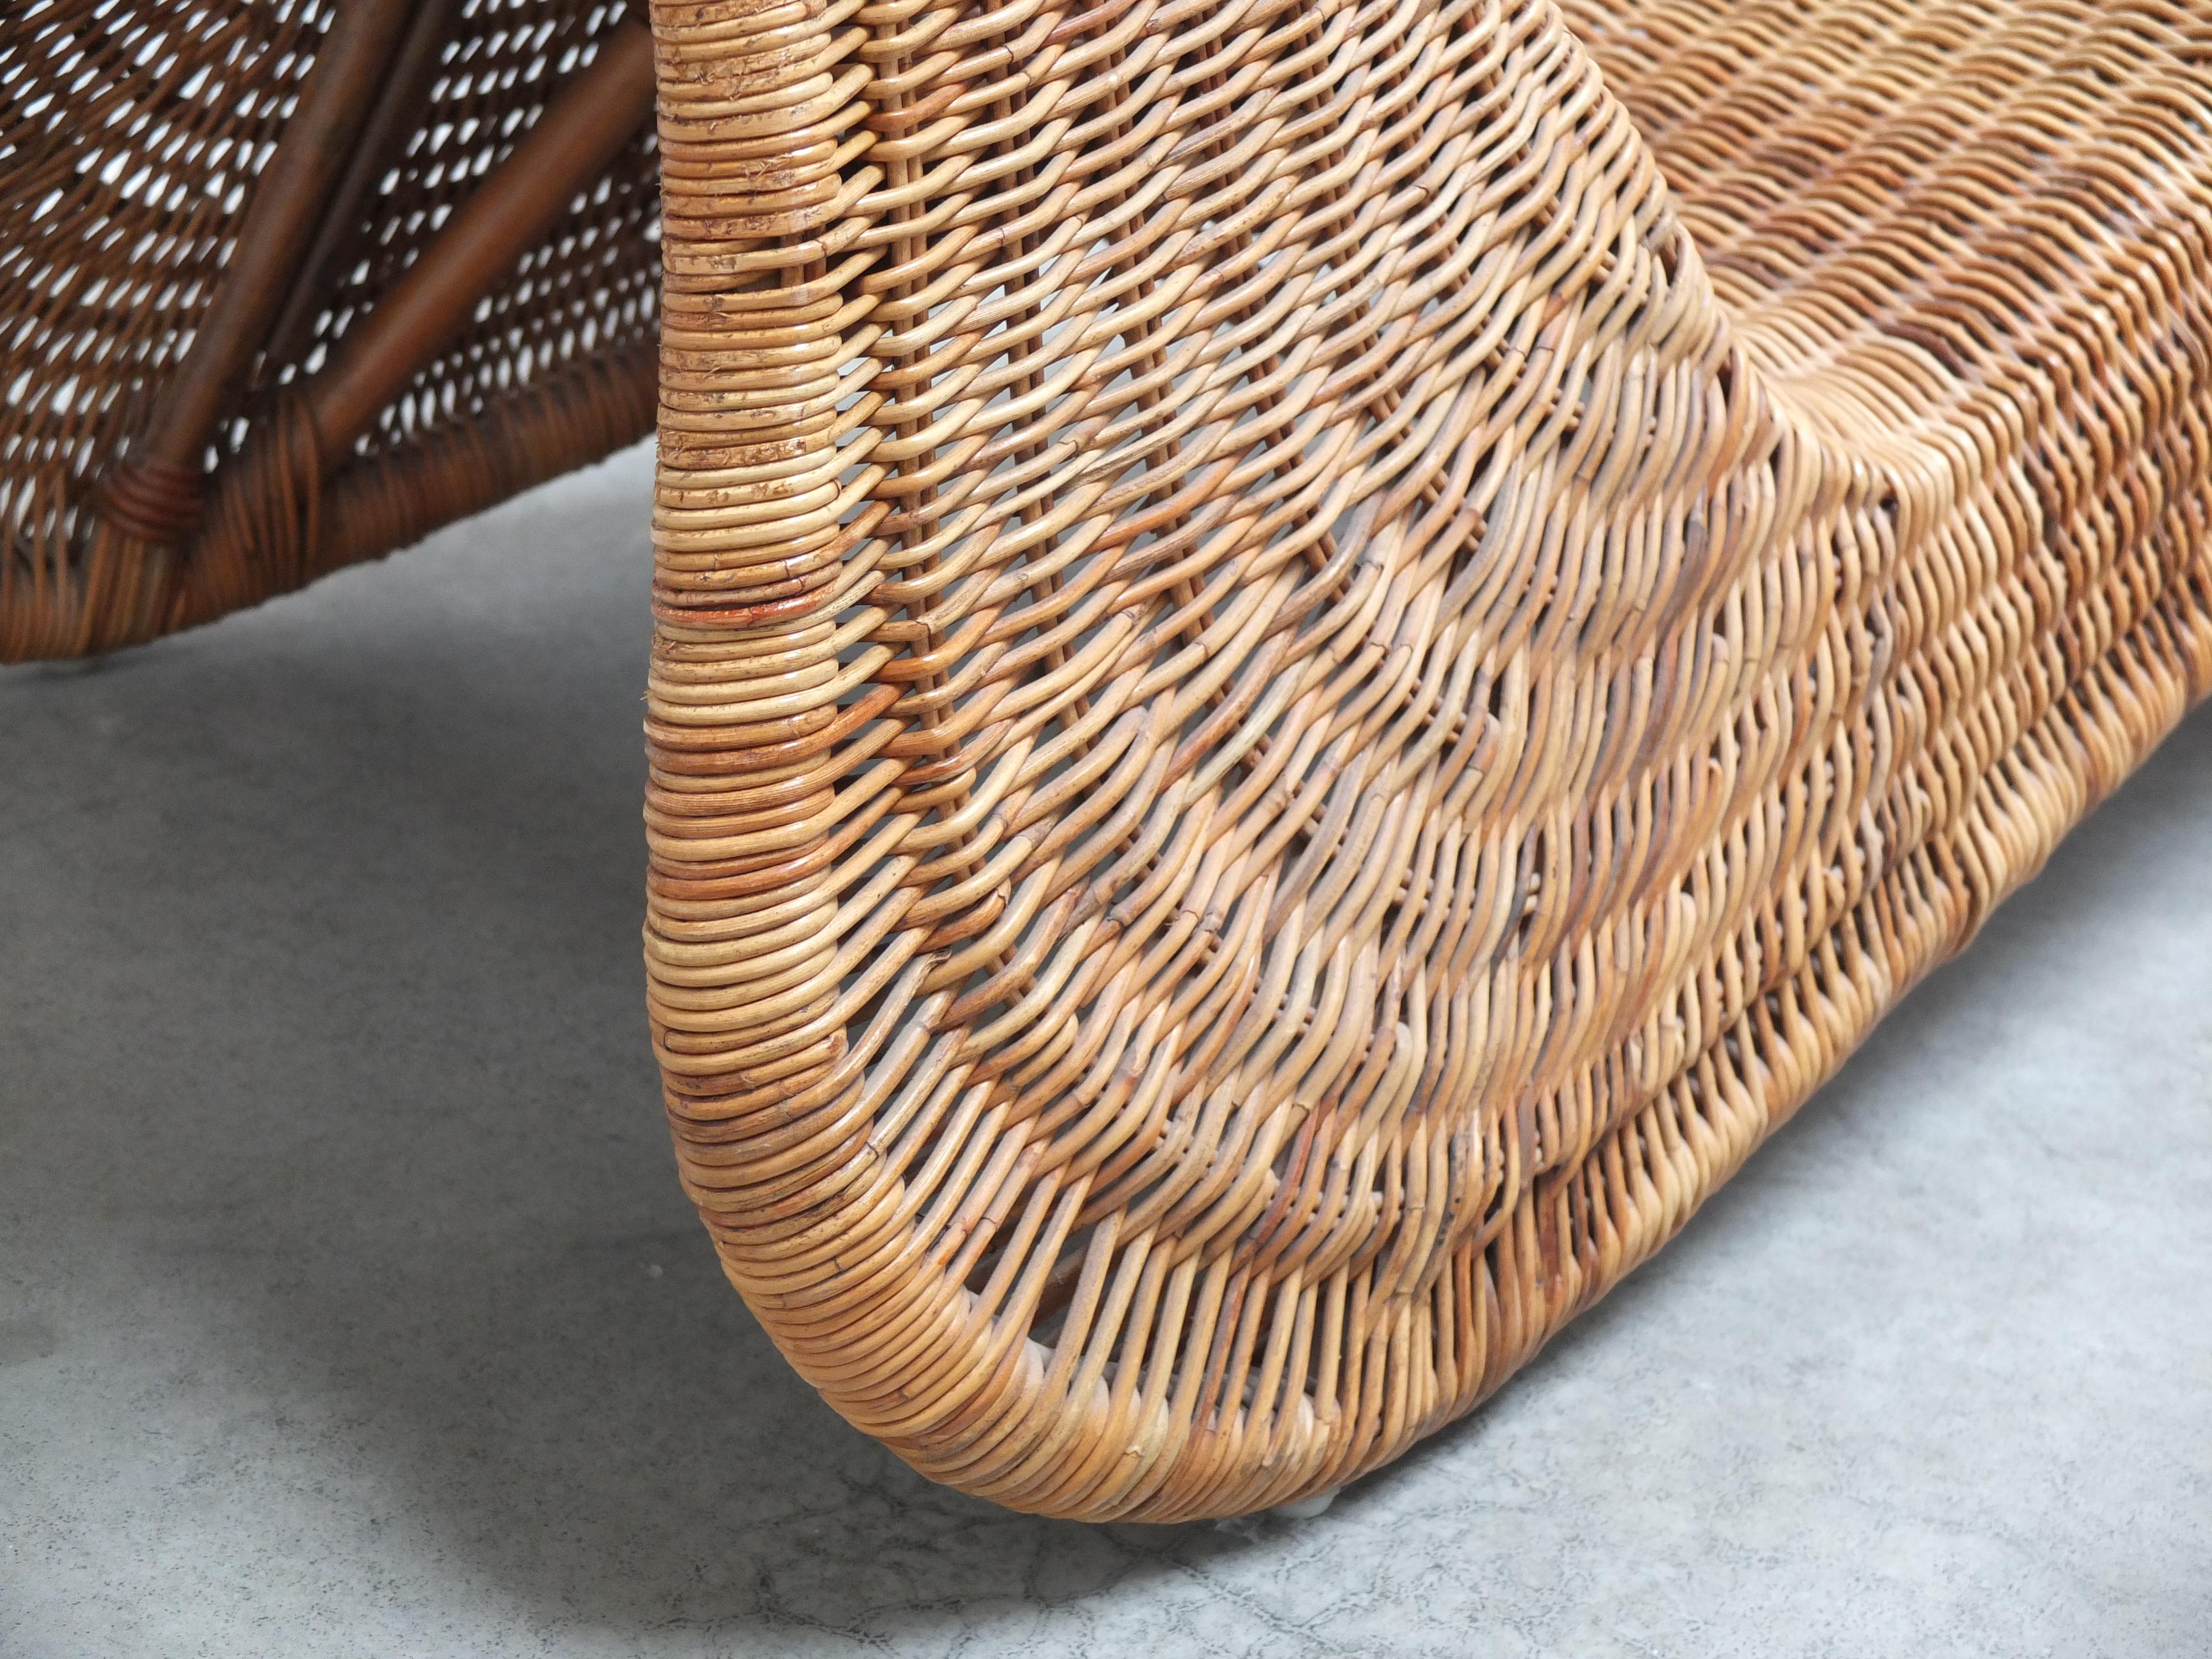 Rattan 'Karlskrona' Chaise Longue by Karl Malmvell for IKEA, 1998 For Sale 3